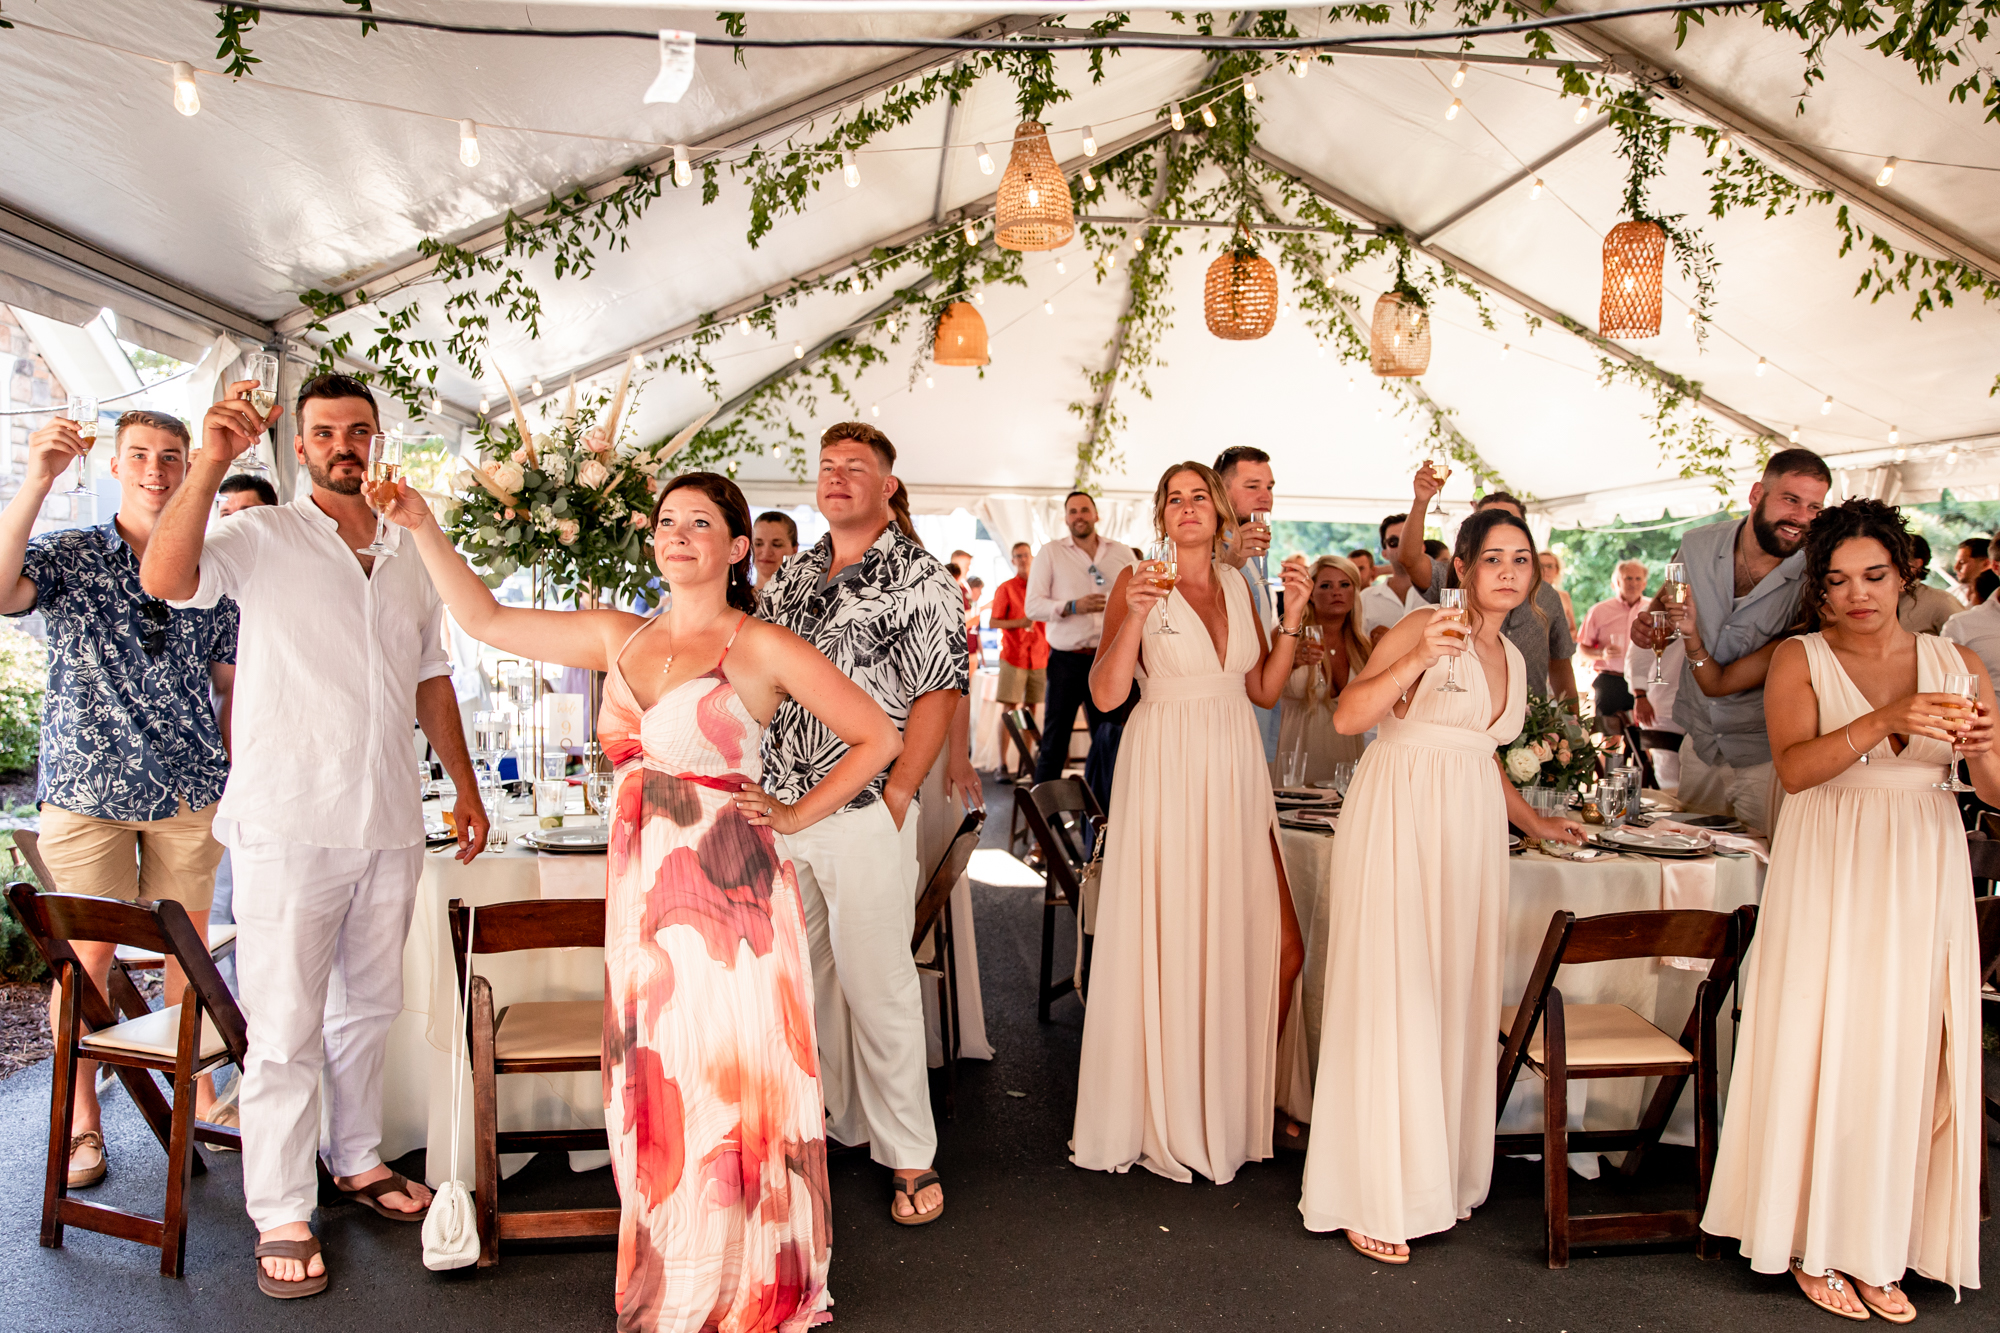 guests toasting at a private beach wedding reception